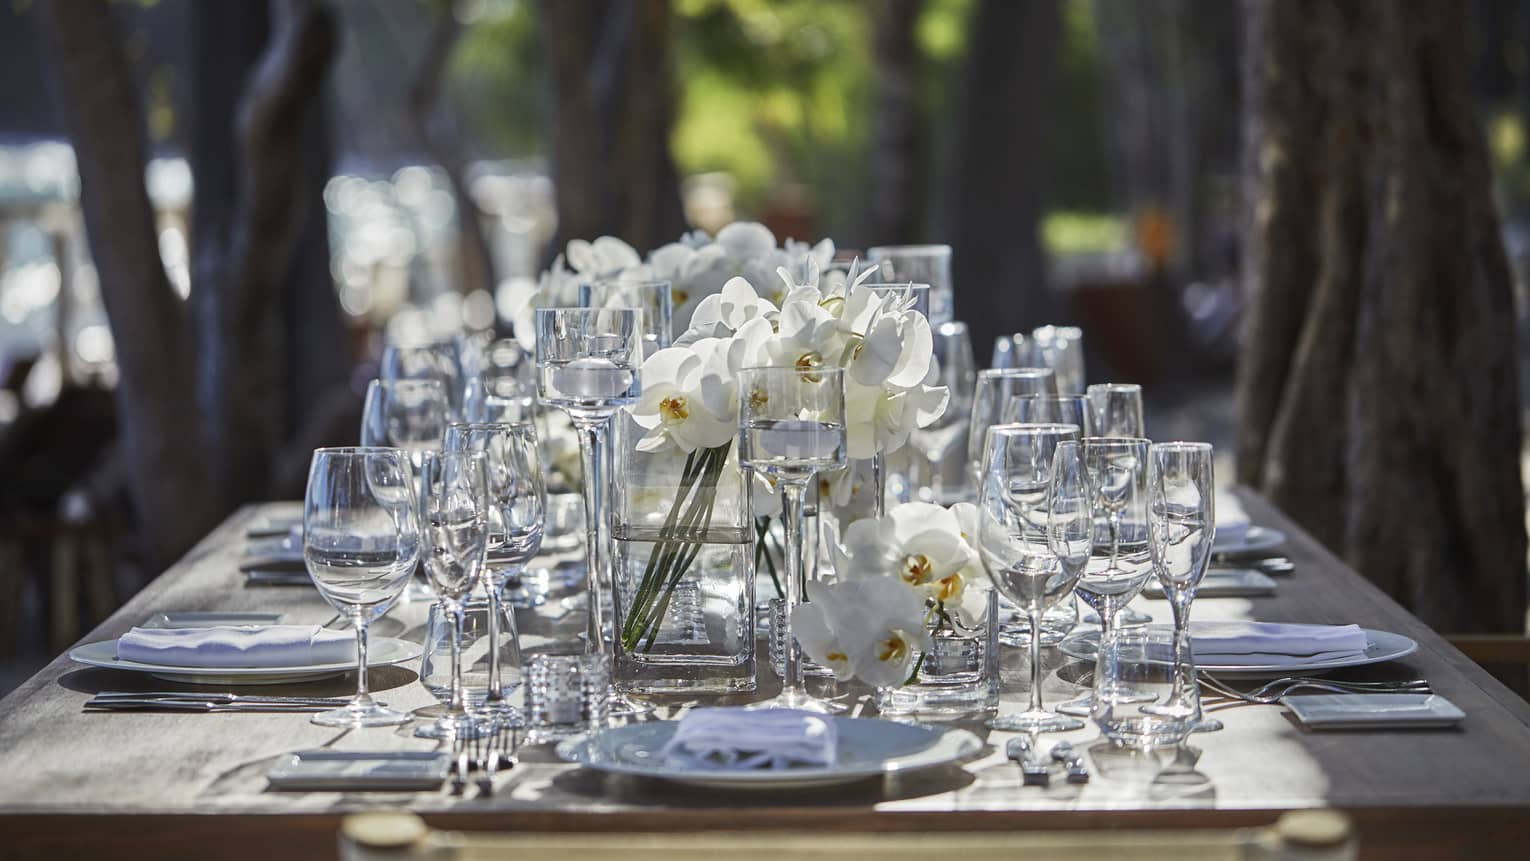 Elegant outdoor dining table under trees set with wine glasses, fresh white flowers in vases